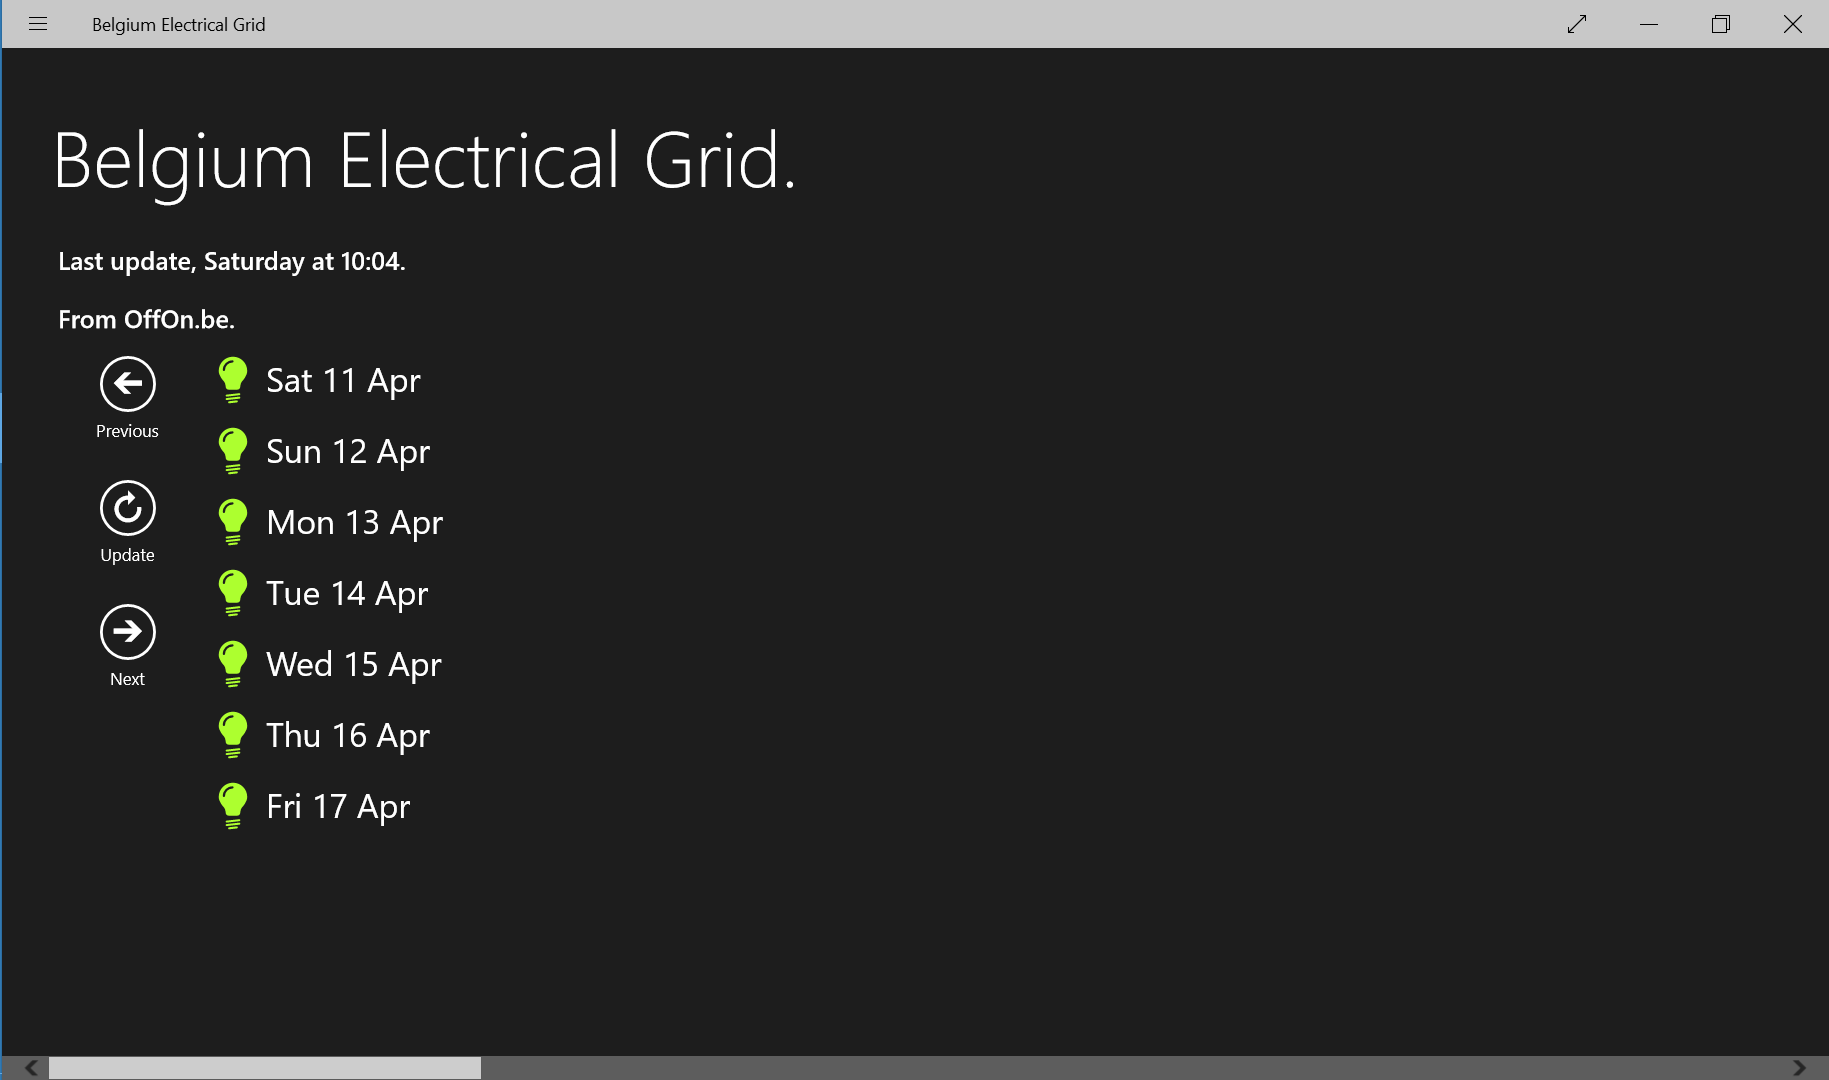 General grid status overview